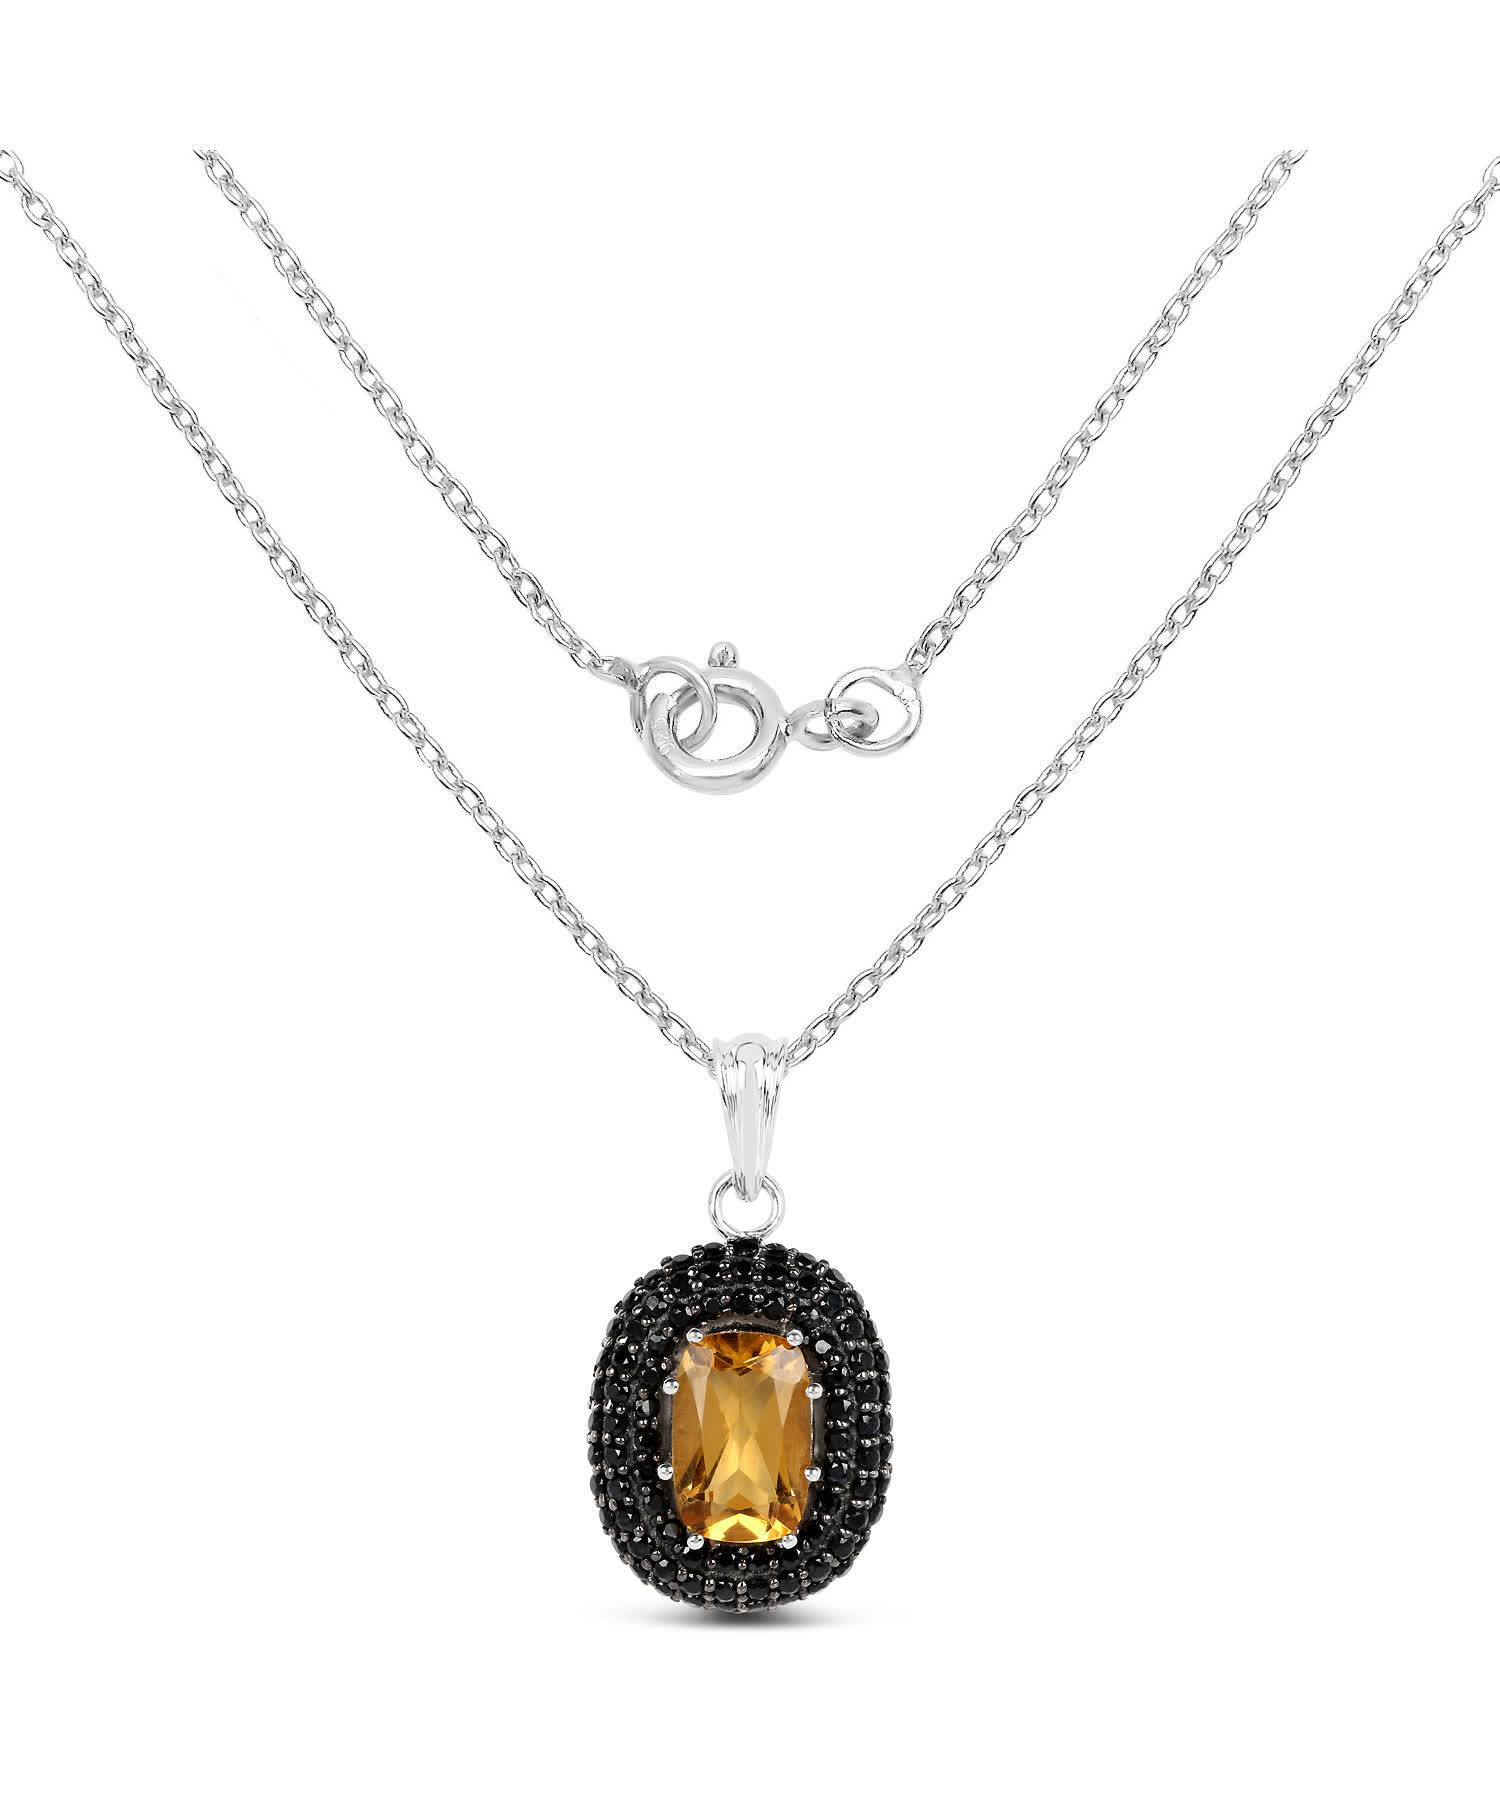 5.85ctw Natural Honey Citrine and Black Spinel Rhodium Plated 925 Sterling Silver Pendant With Chain View 2